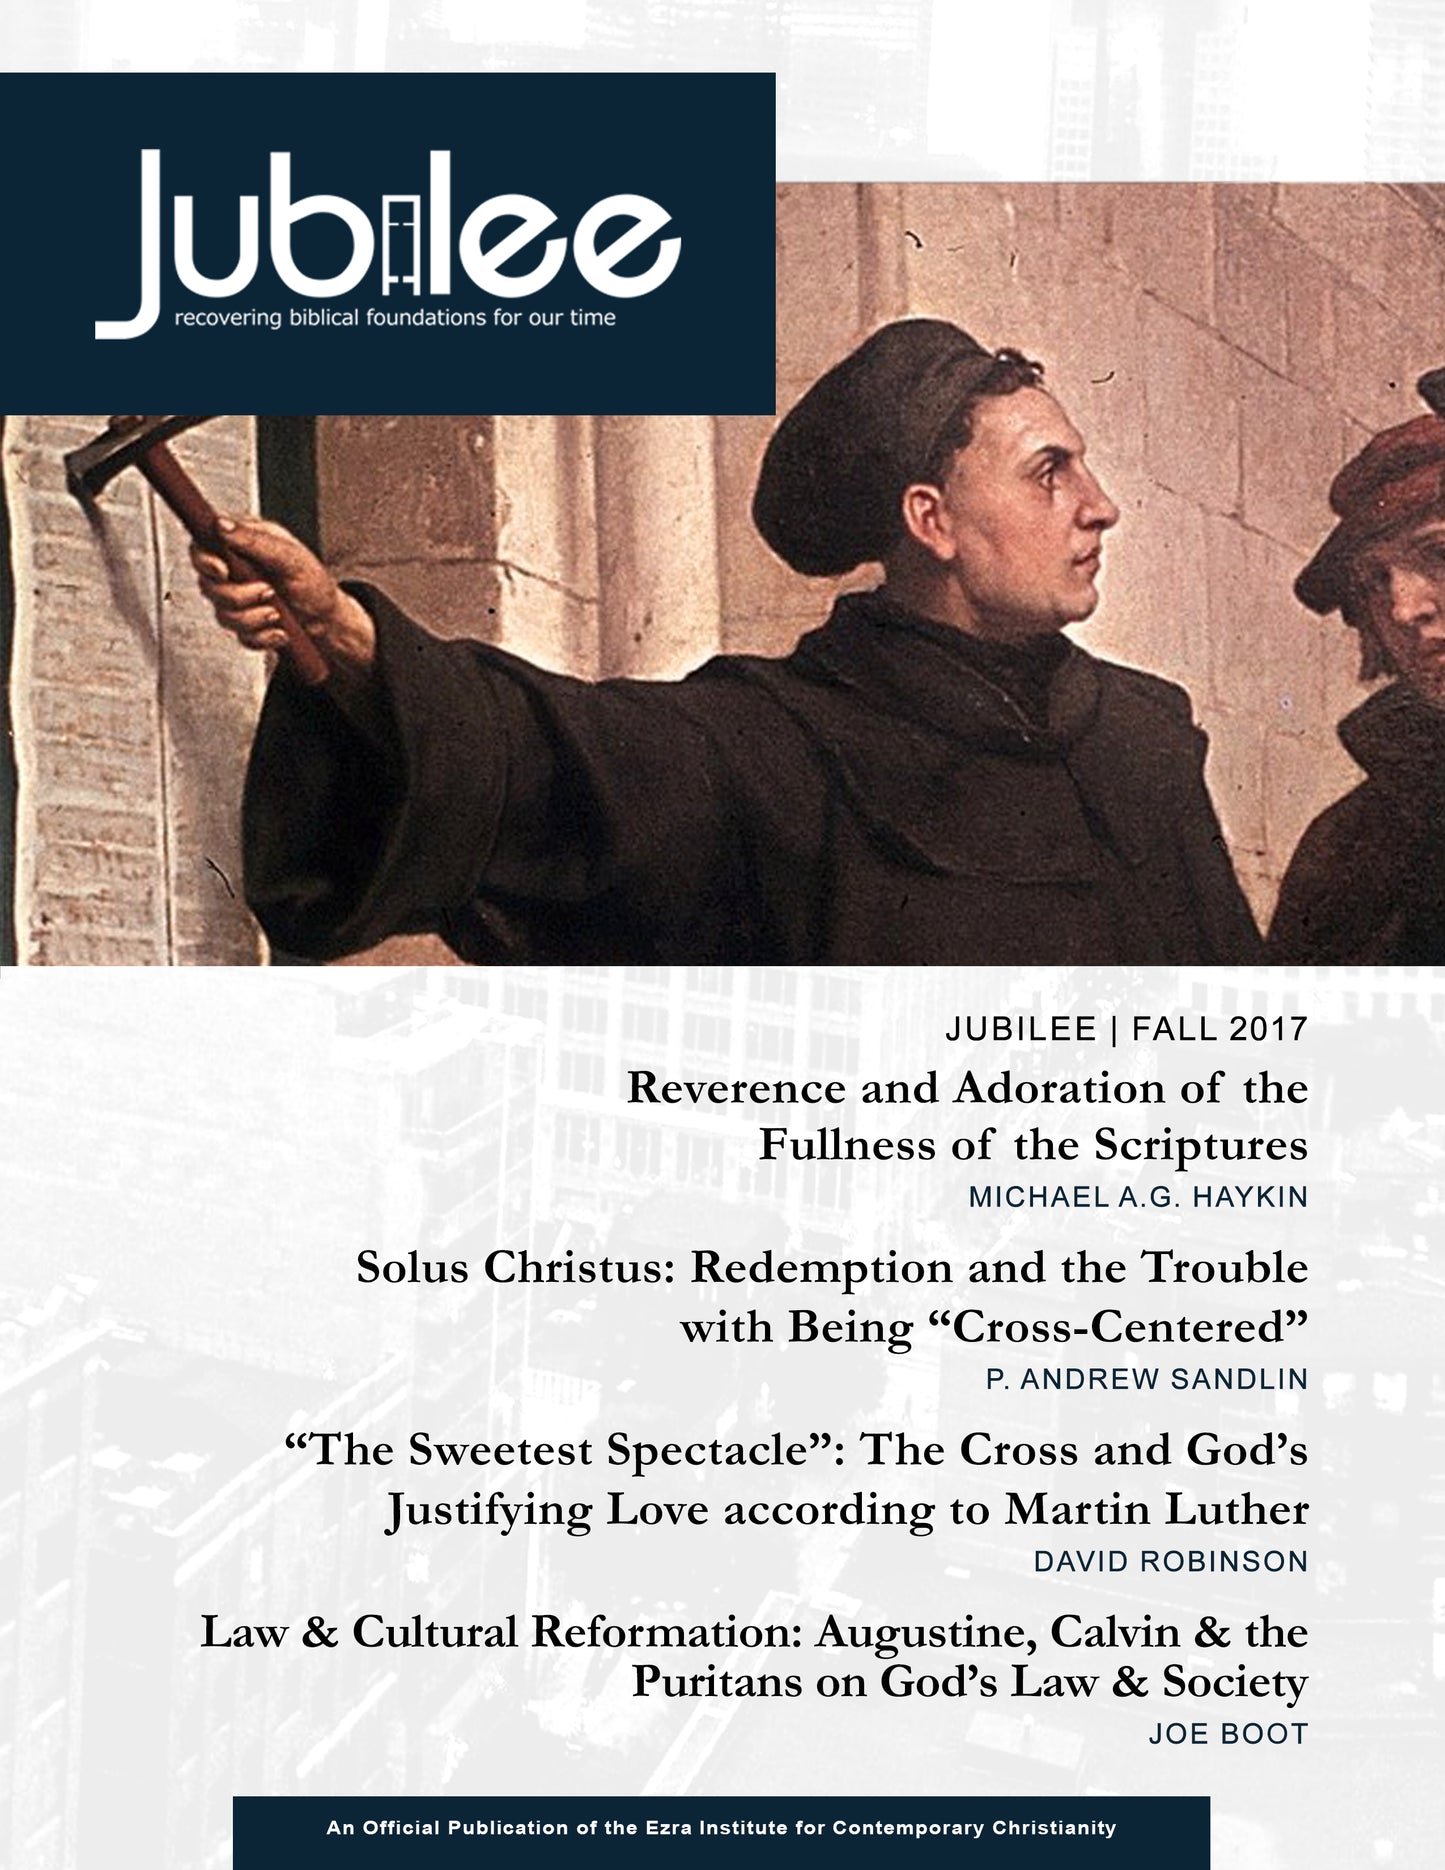 500 Years of Reformation - Fall 2017 - Digital Download / Online Reader